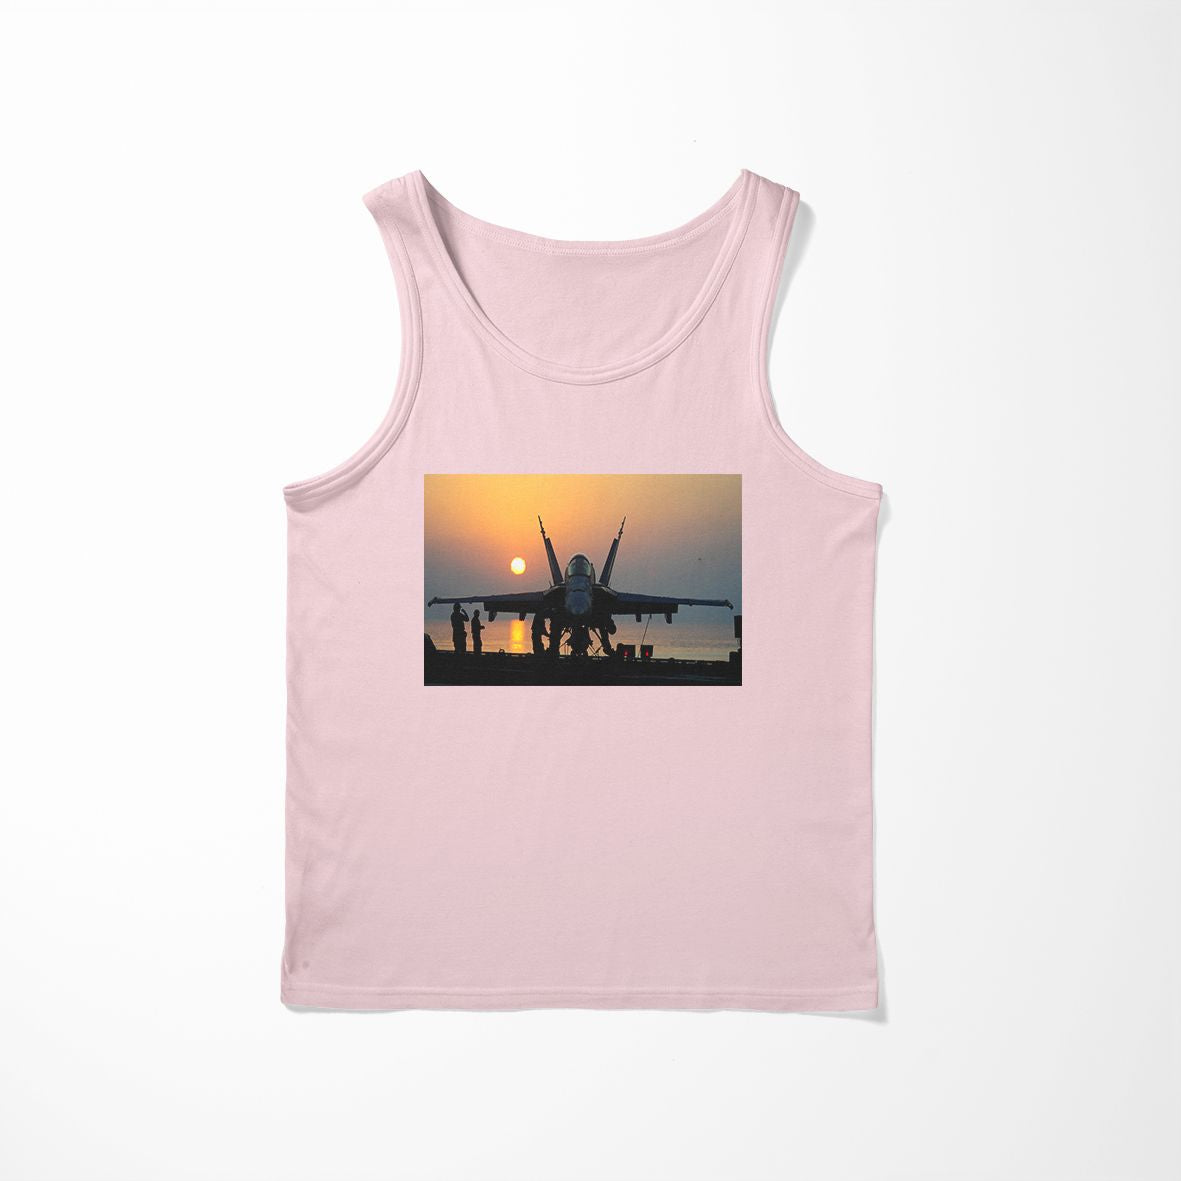 Military Jet During Sunset Designed Tank Tops